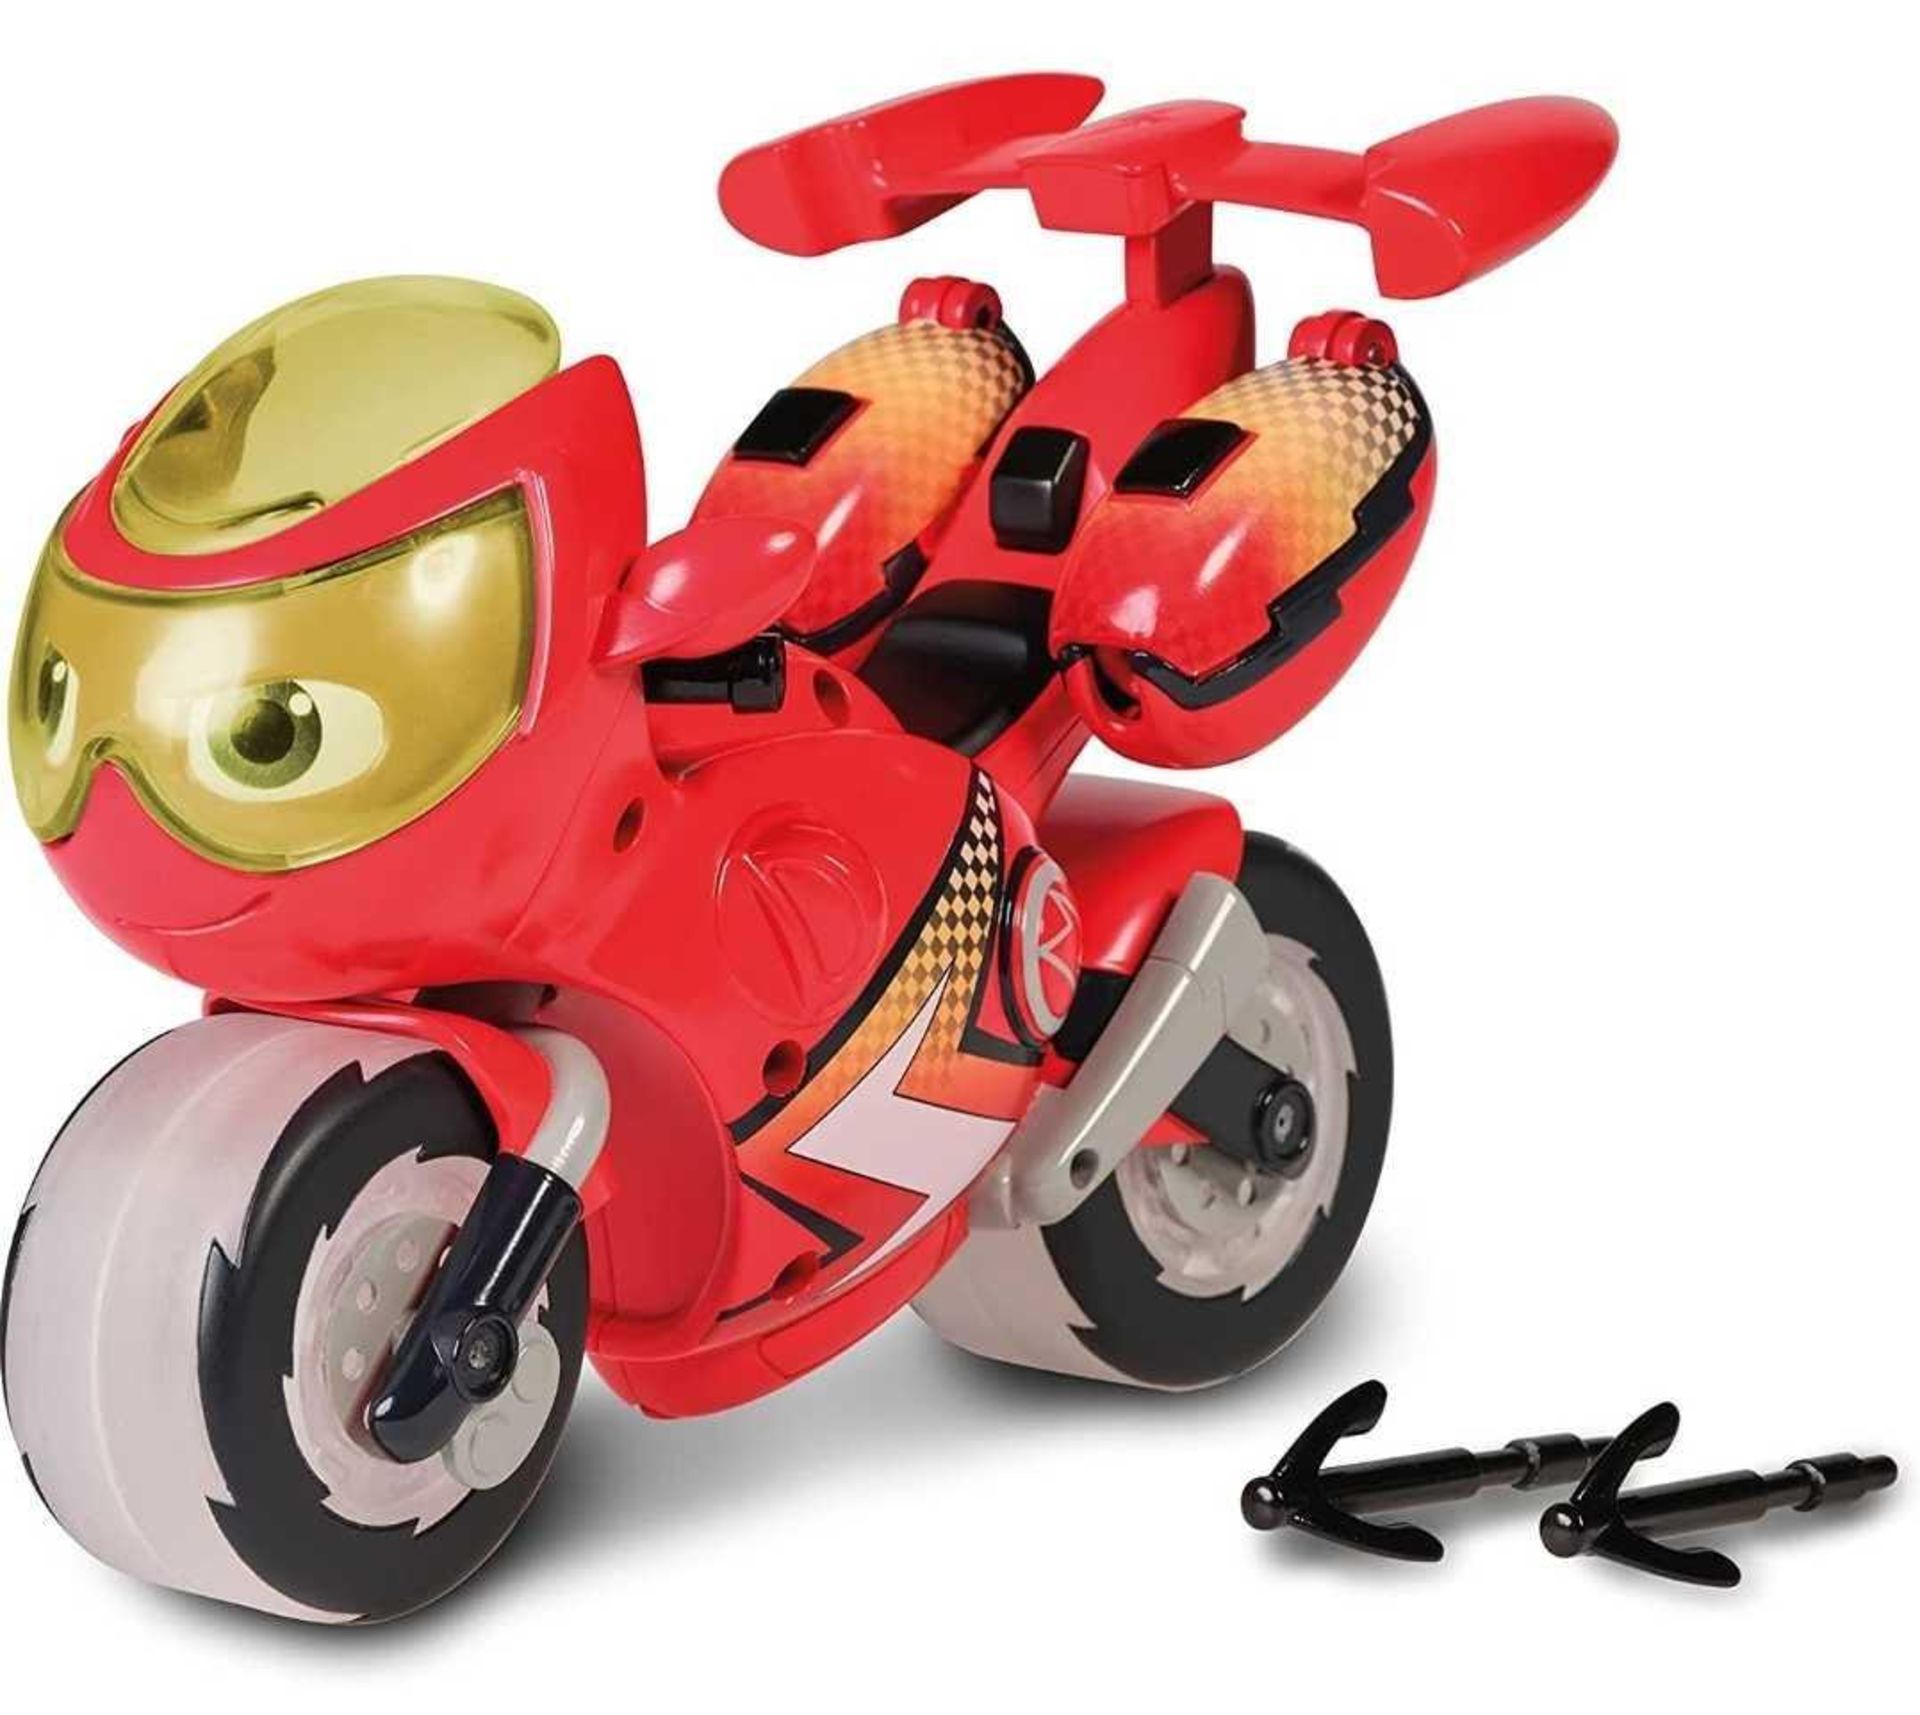 RRP £2700 (Aprox Count 180) Pallet To Contain Ricky Zoom Children'S Toy. (Cp1)(Condition Reports